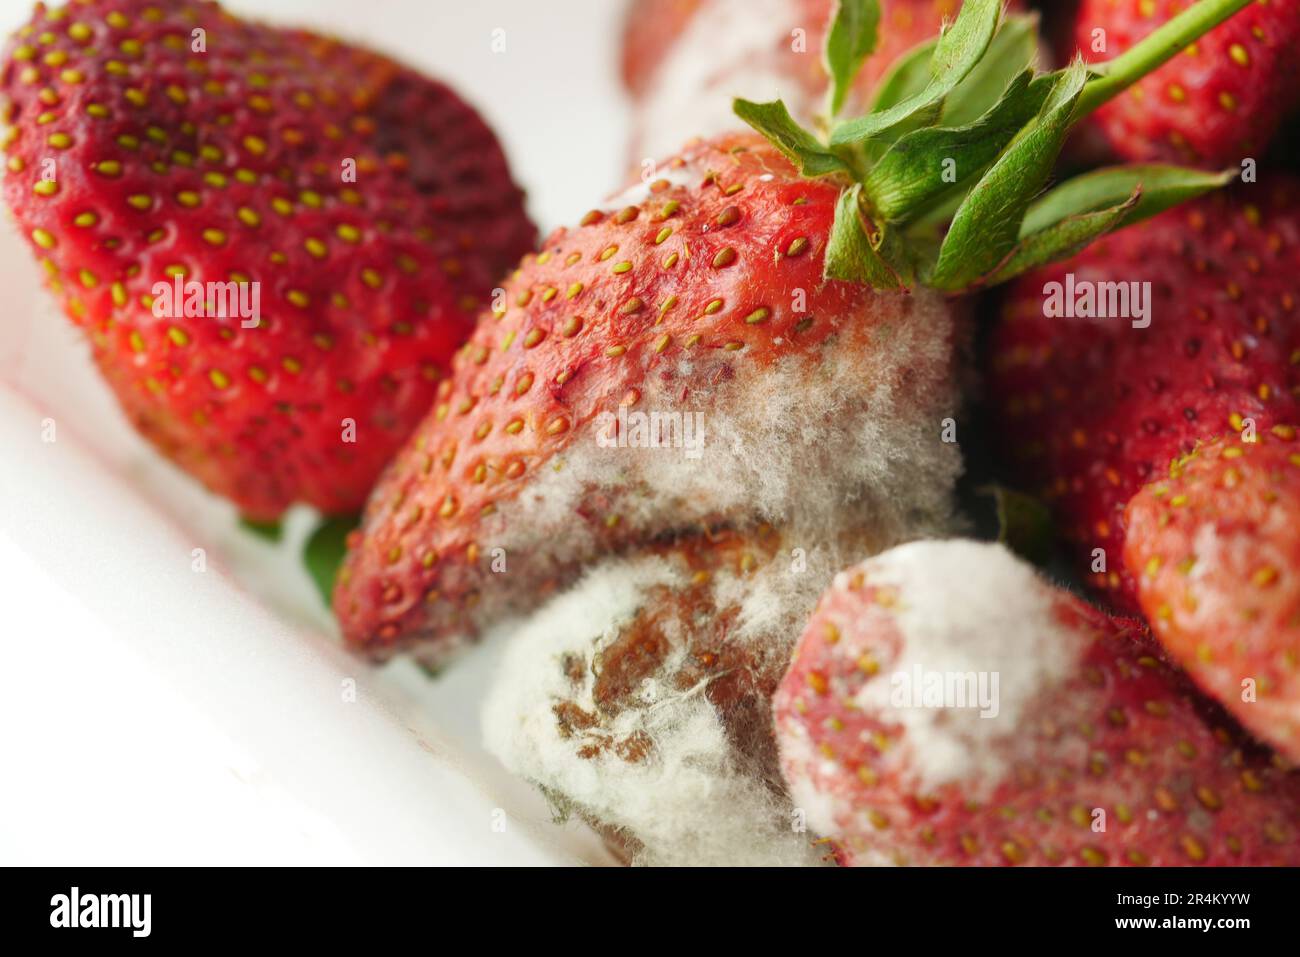 Moldy Strawberry - Stock Image - C007/6140 - Science Photo Library